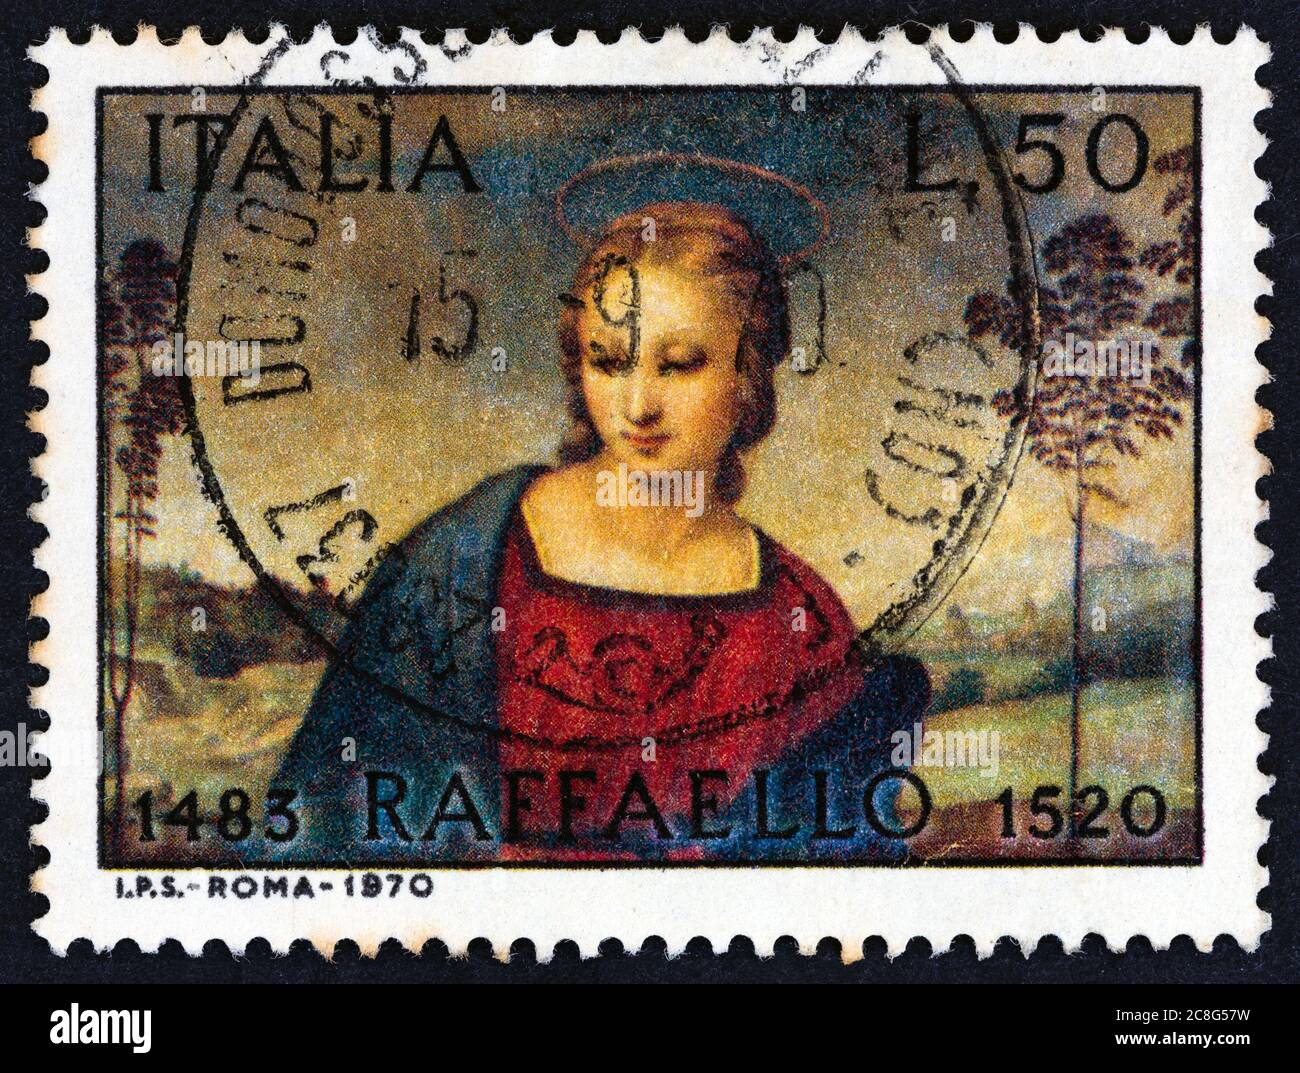 ITALY - CIRCA 1970: A stamp printed in Italy issued for the 450th death anniversary of Raphael shows Madonna of the Goldfinch, circa 1970. Stock Photo